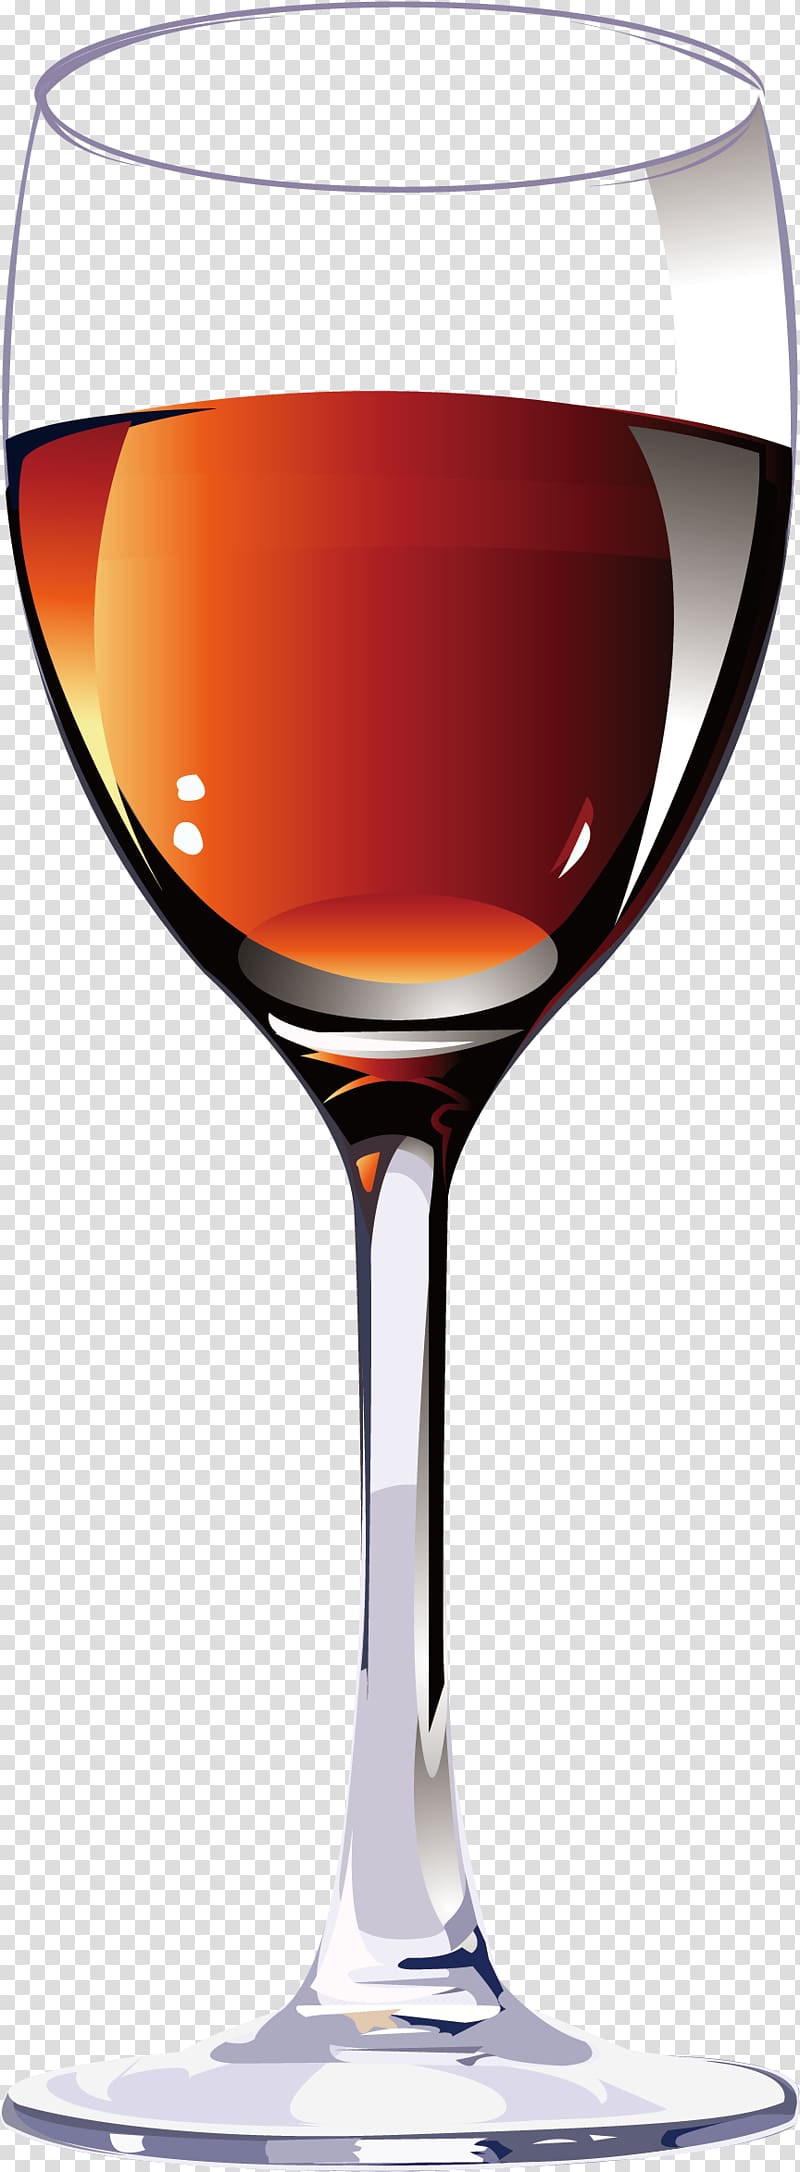 Red Wine Wine glass Cup, A glass of red wine transparent background PNG clipart